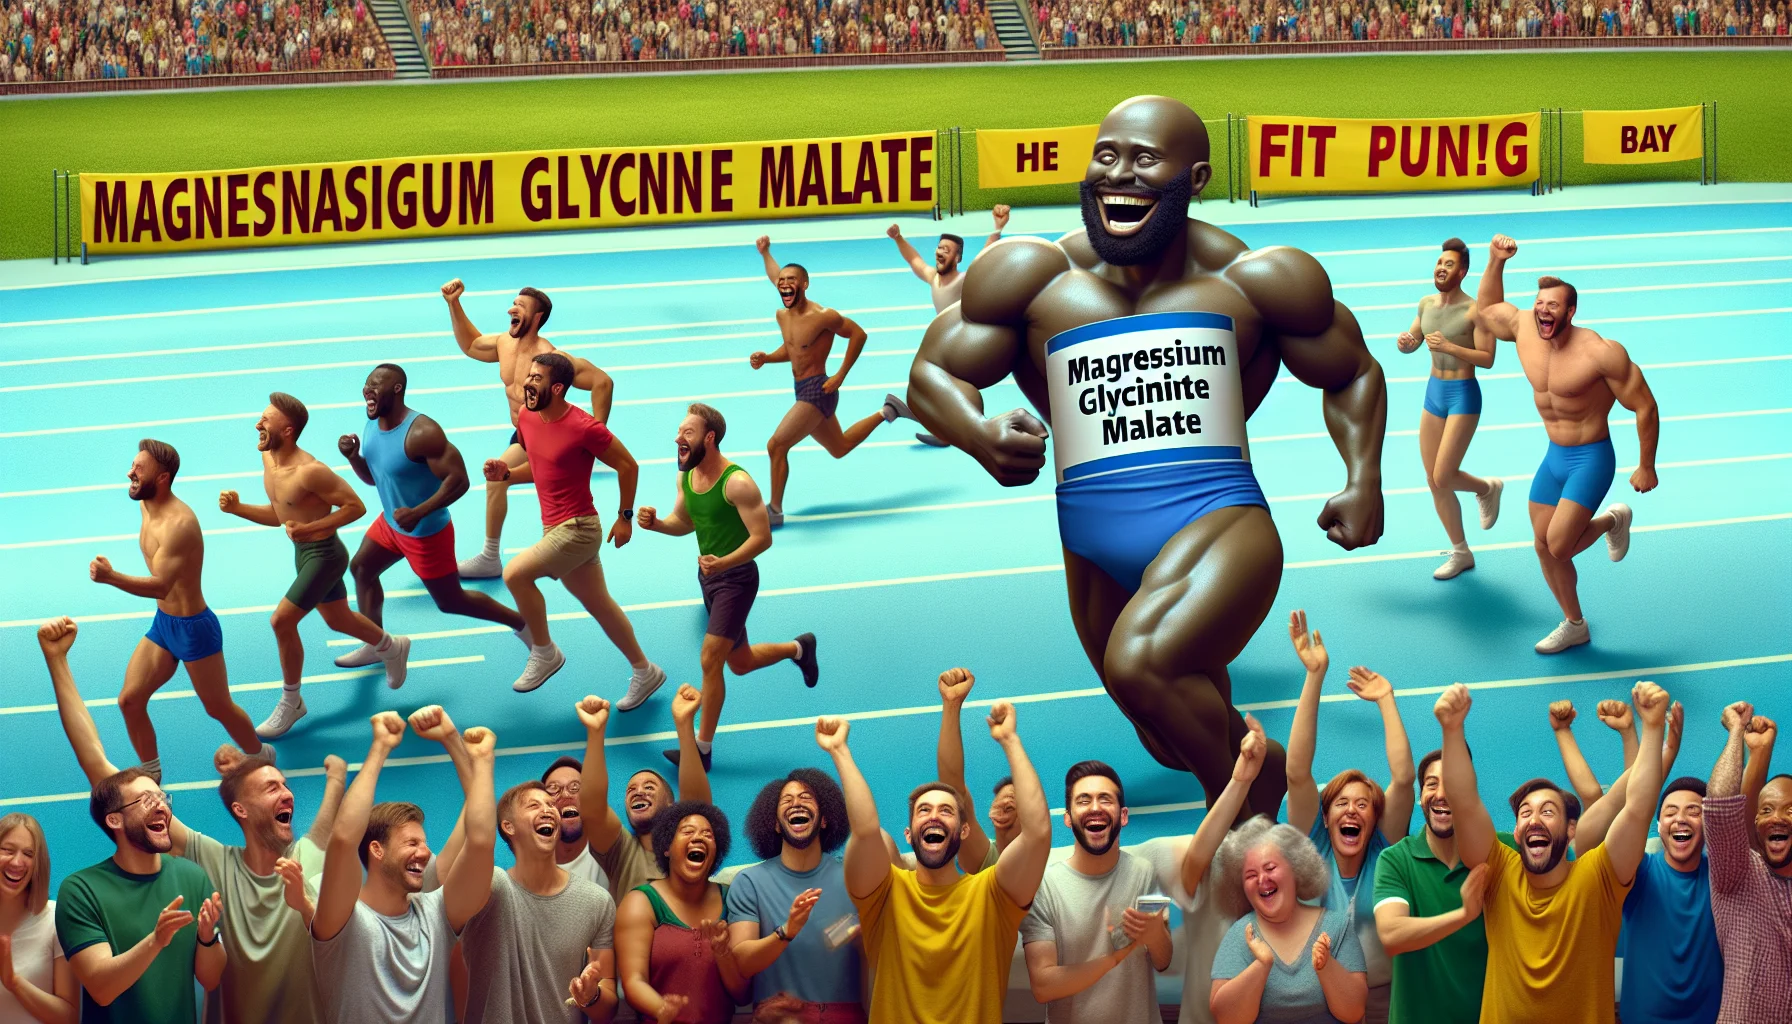 Create a vivid and comical scene that showcases magnesium glycinate malate, a popular sports supplement. This scene might include the supplement participating in a humorous mock track-and-field event, anthropomorphized with a fit physique. The crowd of diverse spectators, split evenly between men and women of Caucasian, South Asian, Hispanic, Black, and Middle-Eastern descent, could be laughing and cheering enthusiastically. The setting may be a stadium filled with banners displaying sport-related puns. The endeavor is to create a visually engaging and enticing atmosphere to promote the idea of sports supplements.